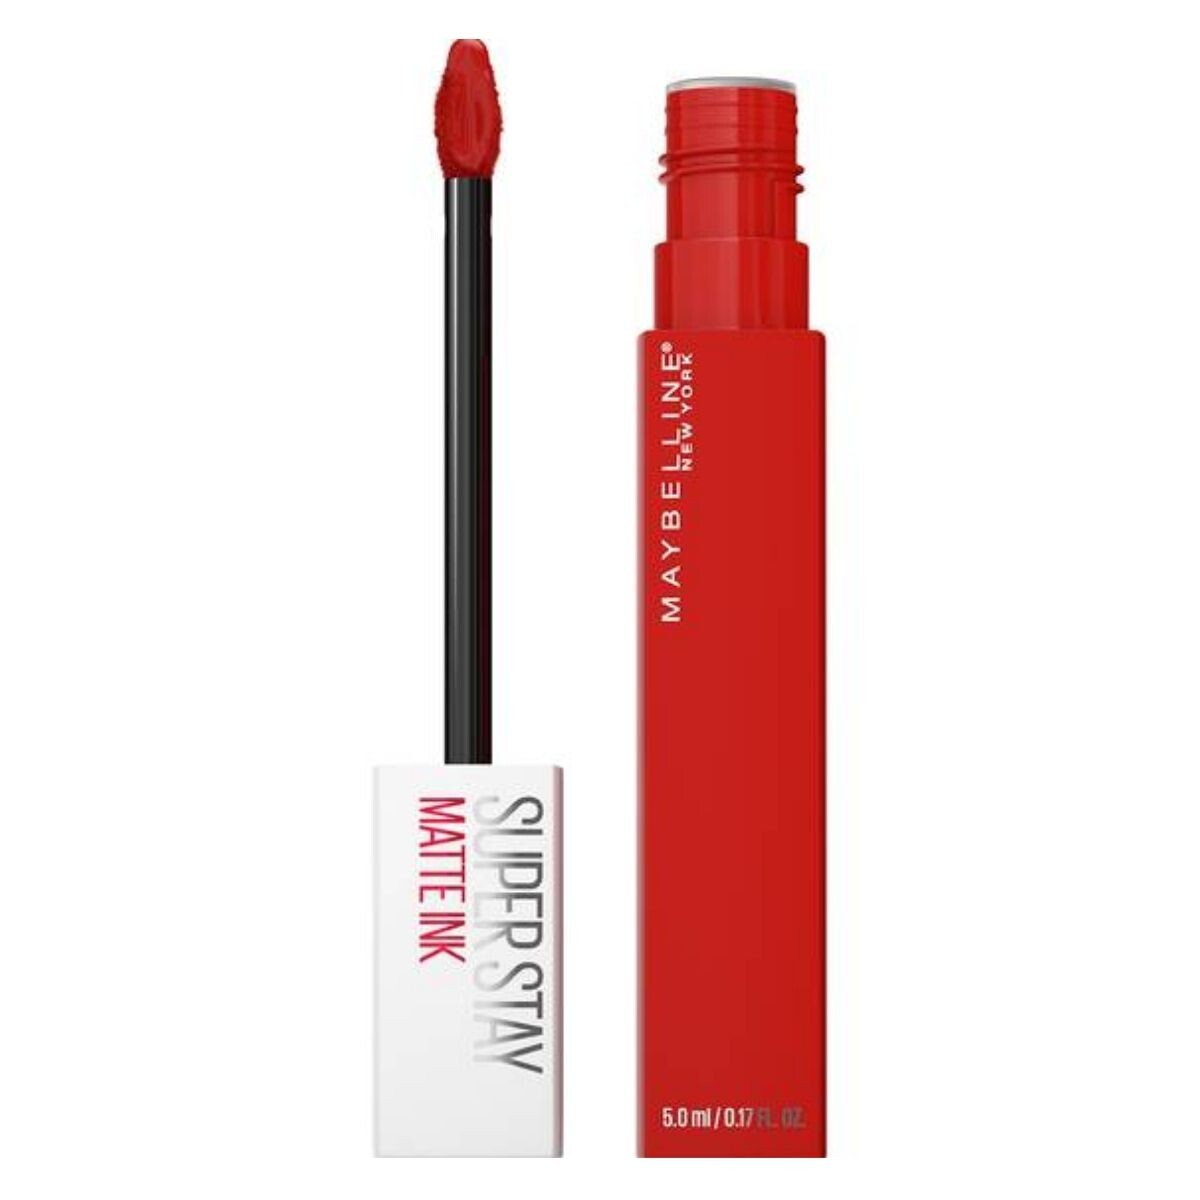 Labial Maybelline Super Stay Spice Edition - Innovator 330 